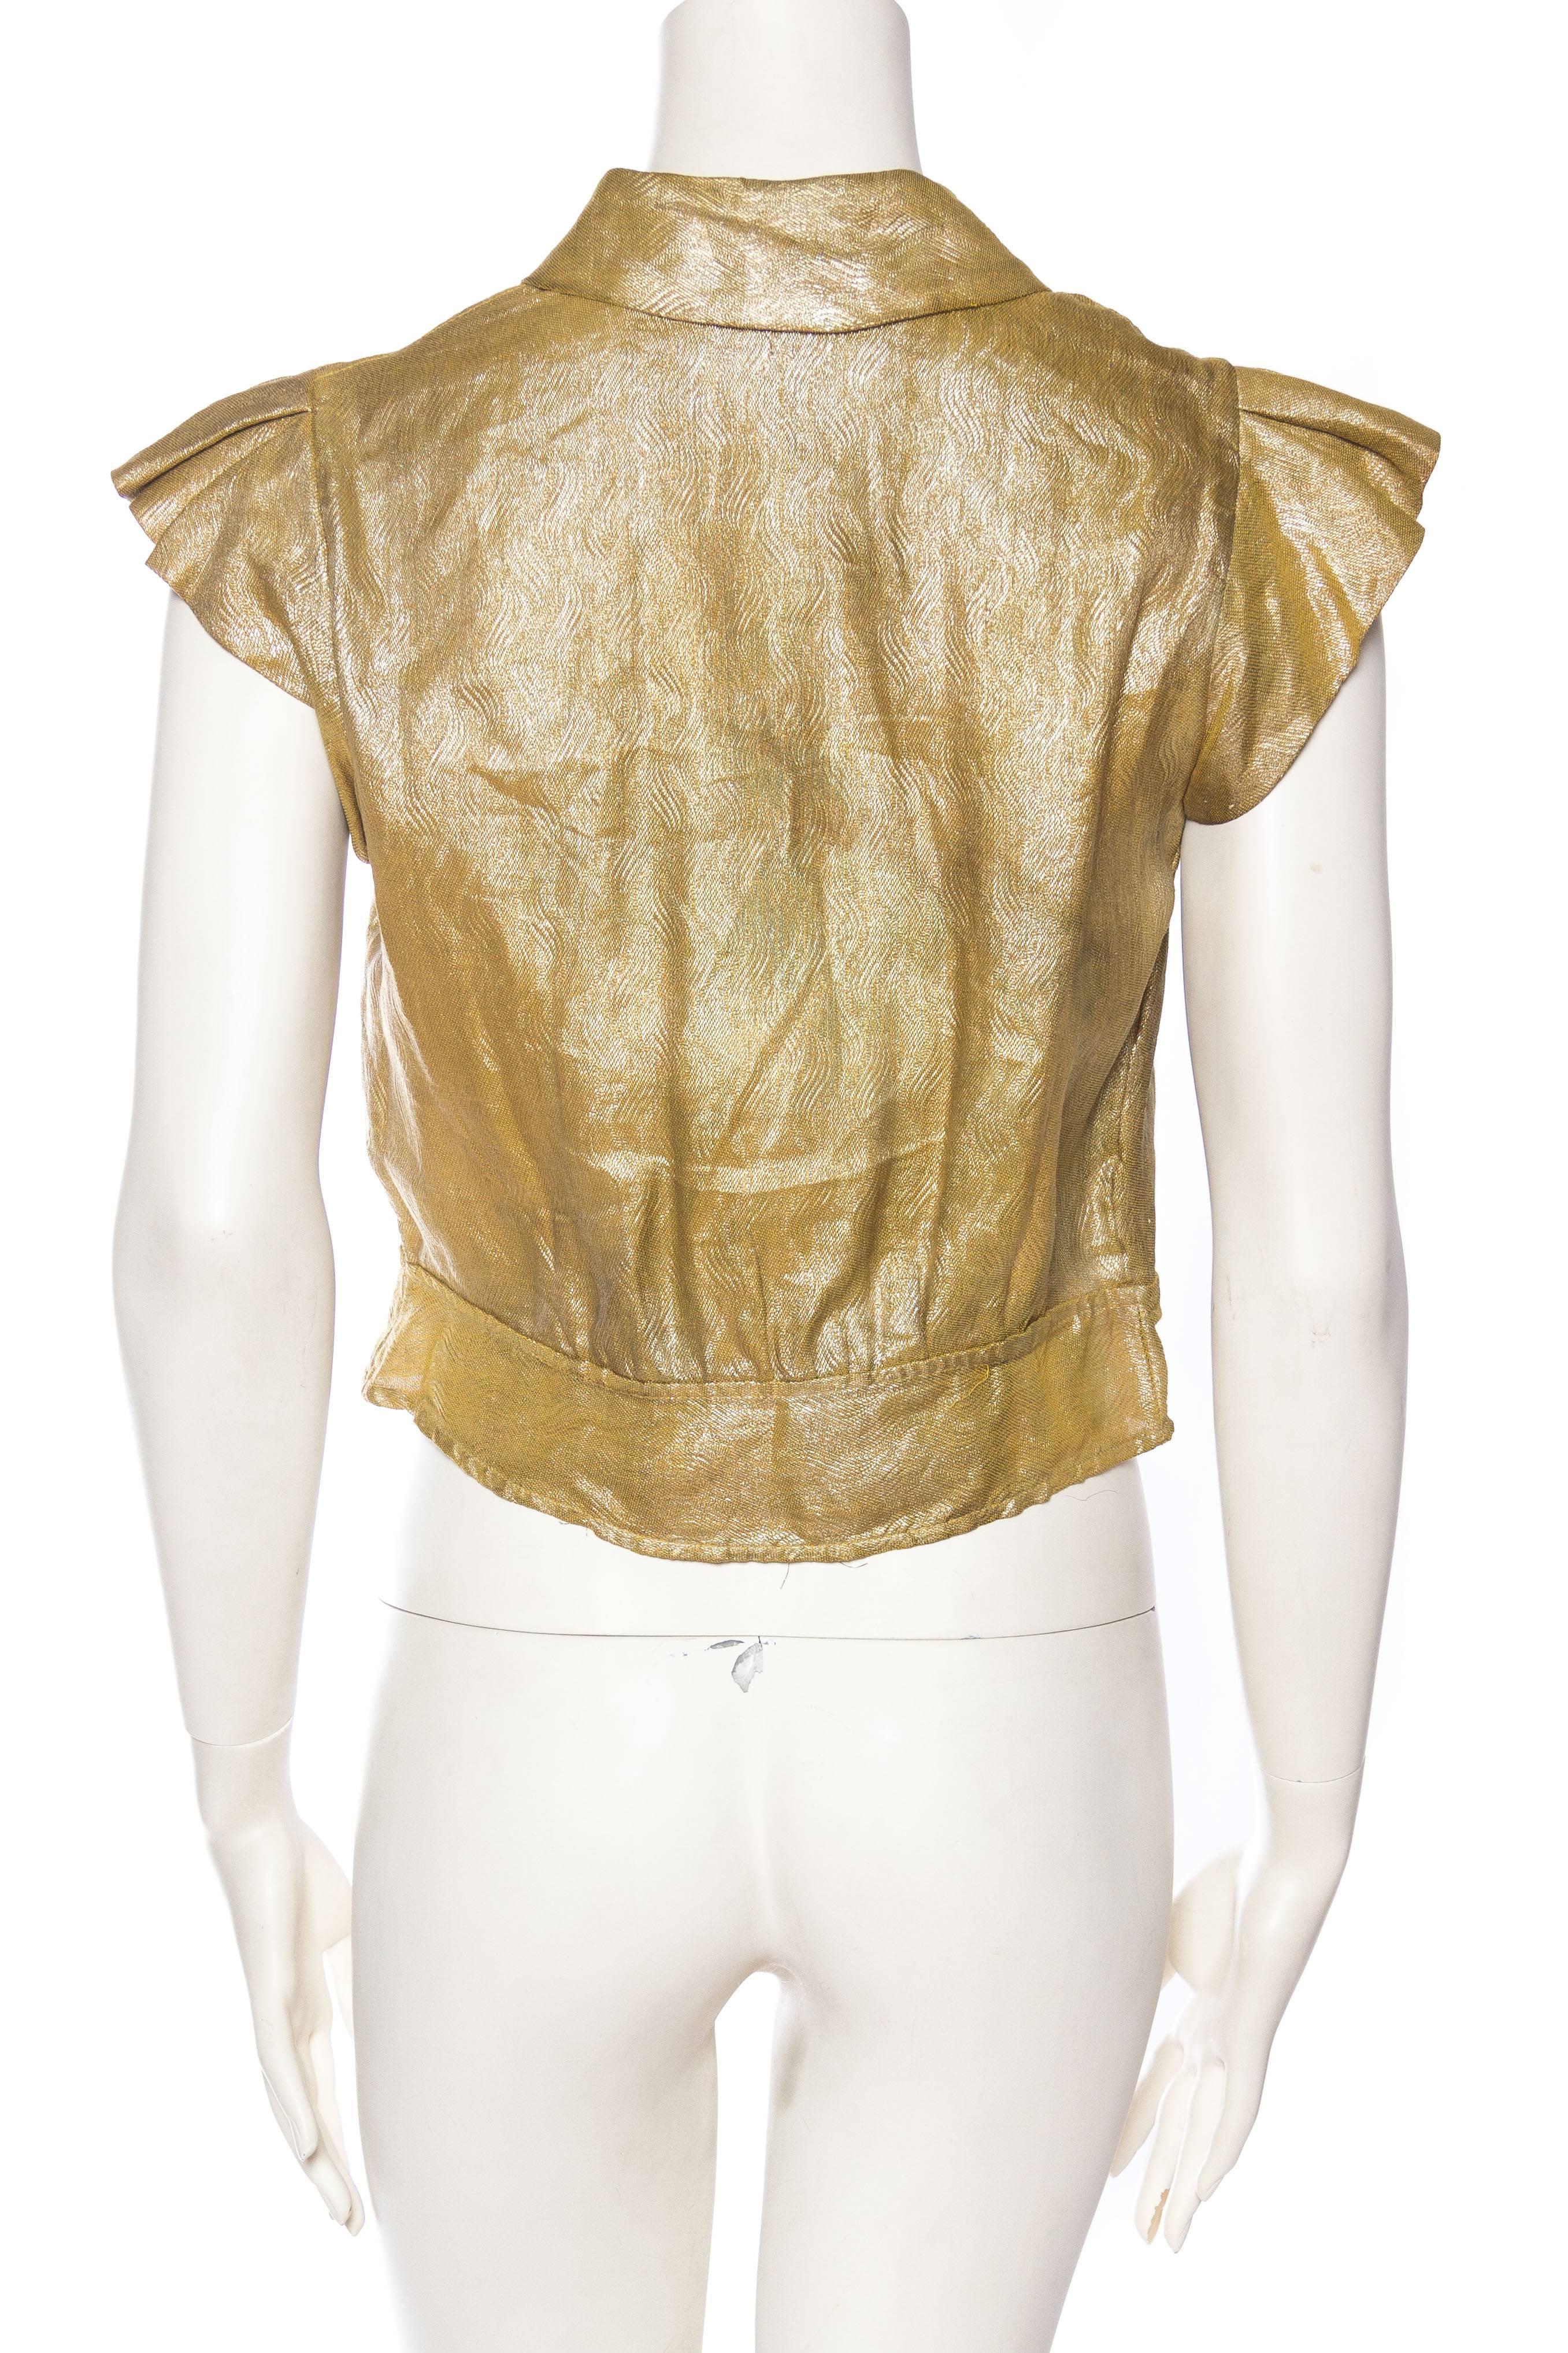 Jeanne Lanvin Gold Lamé Blouse, 1930s  In Good Condition In New York, NY